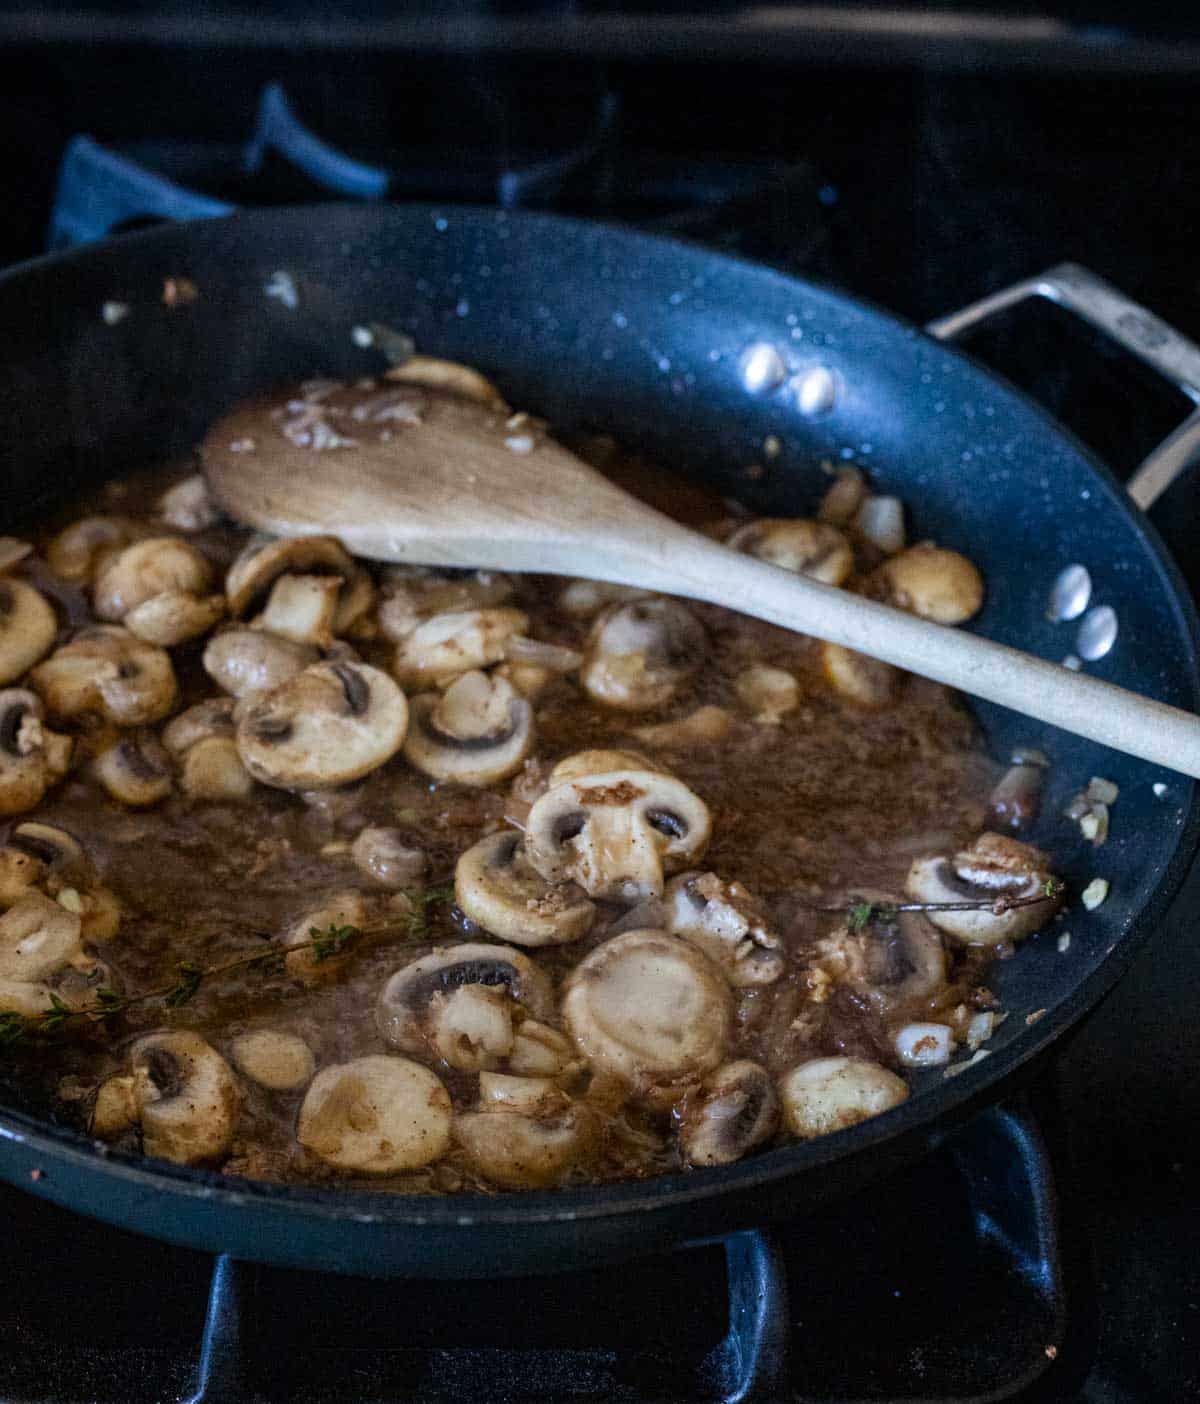 mushrooms sauteed in a skillet with a brown liquid